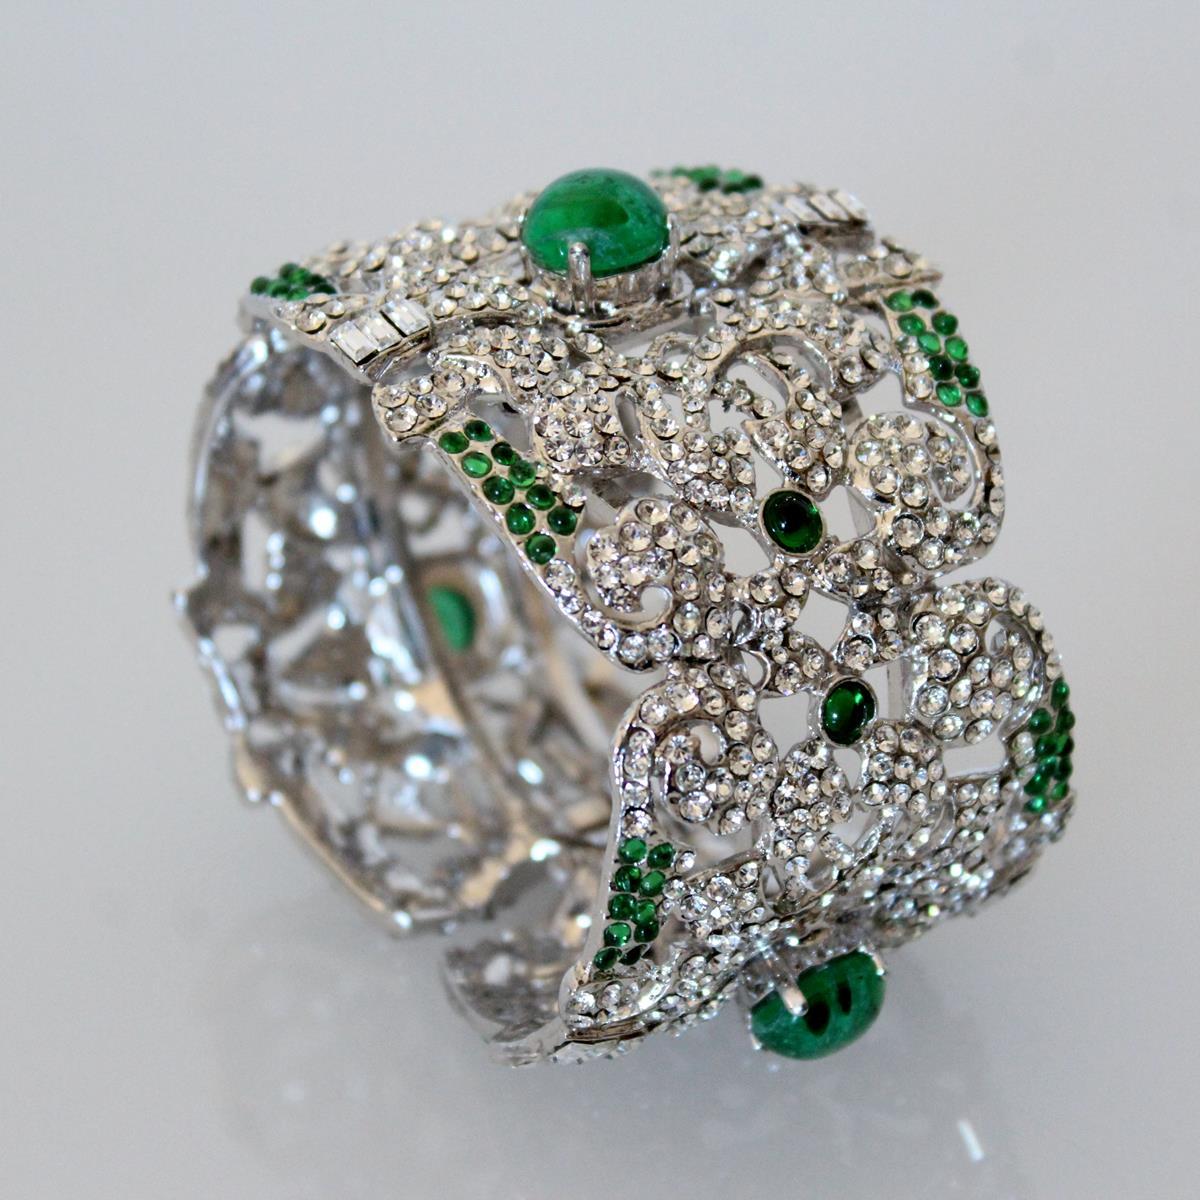 Stunning piece by Carlo Zini Milano
One of the greatest world fashion jewelry designers
Wonderful bracelet in non allergenic rhodium
Amazing hand creation of swarovski crystals
Emerald like resins
Wrist size cm 17 (6.69 inches)
Handmade in